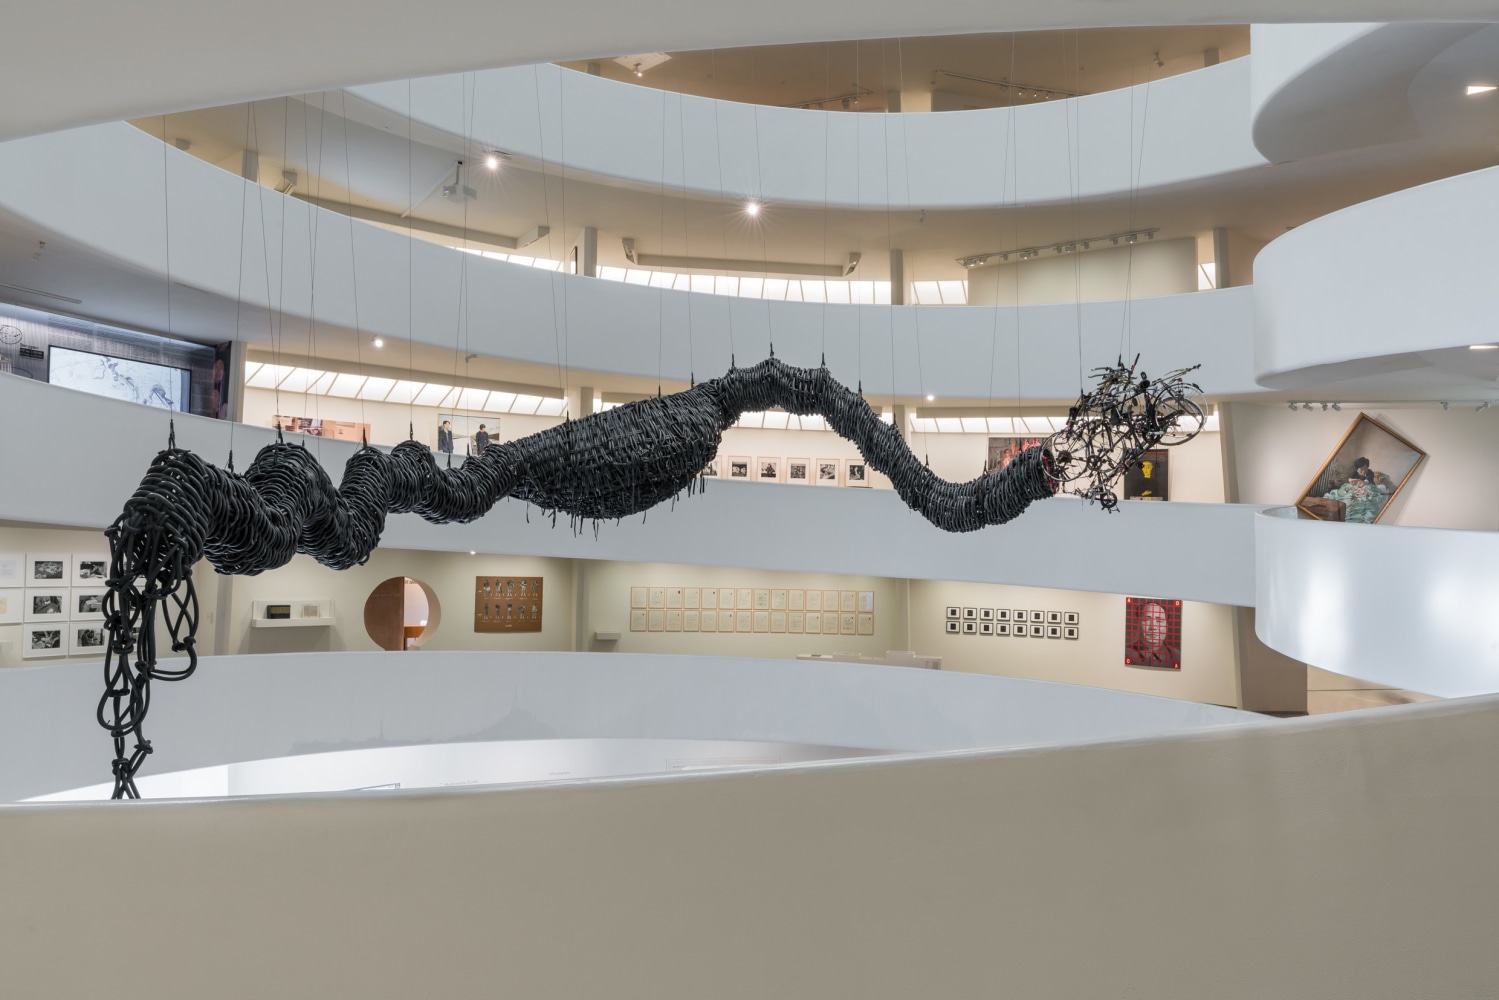 Chen Zhen,&amp;nbsp;Precipitous Parturition, 1999
Pinault Collection, Paris &amp;copy; Chen Zhen

Installation view:&amp;nbsp;Art and China after 1989: Theater of the World, Solomon R. Guggenheim Museum, New York, October 6, 2017&amp;ndash;January 7, 2018
Photo: David Heald &amp;copy; Solomon R. Guggenheim Foundation, 2017

&amp;nbsp;